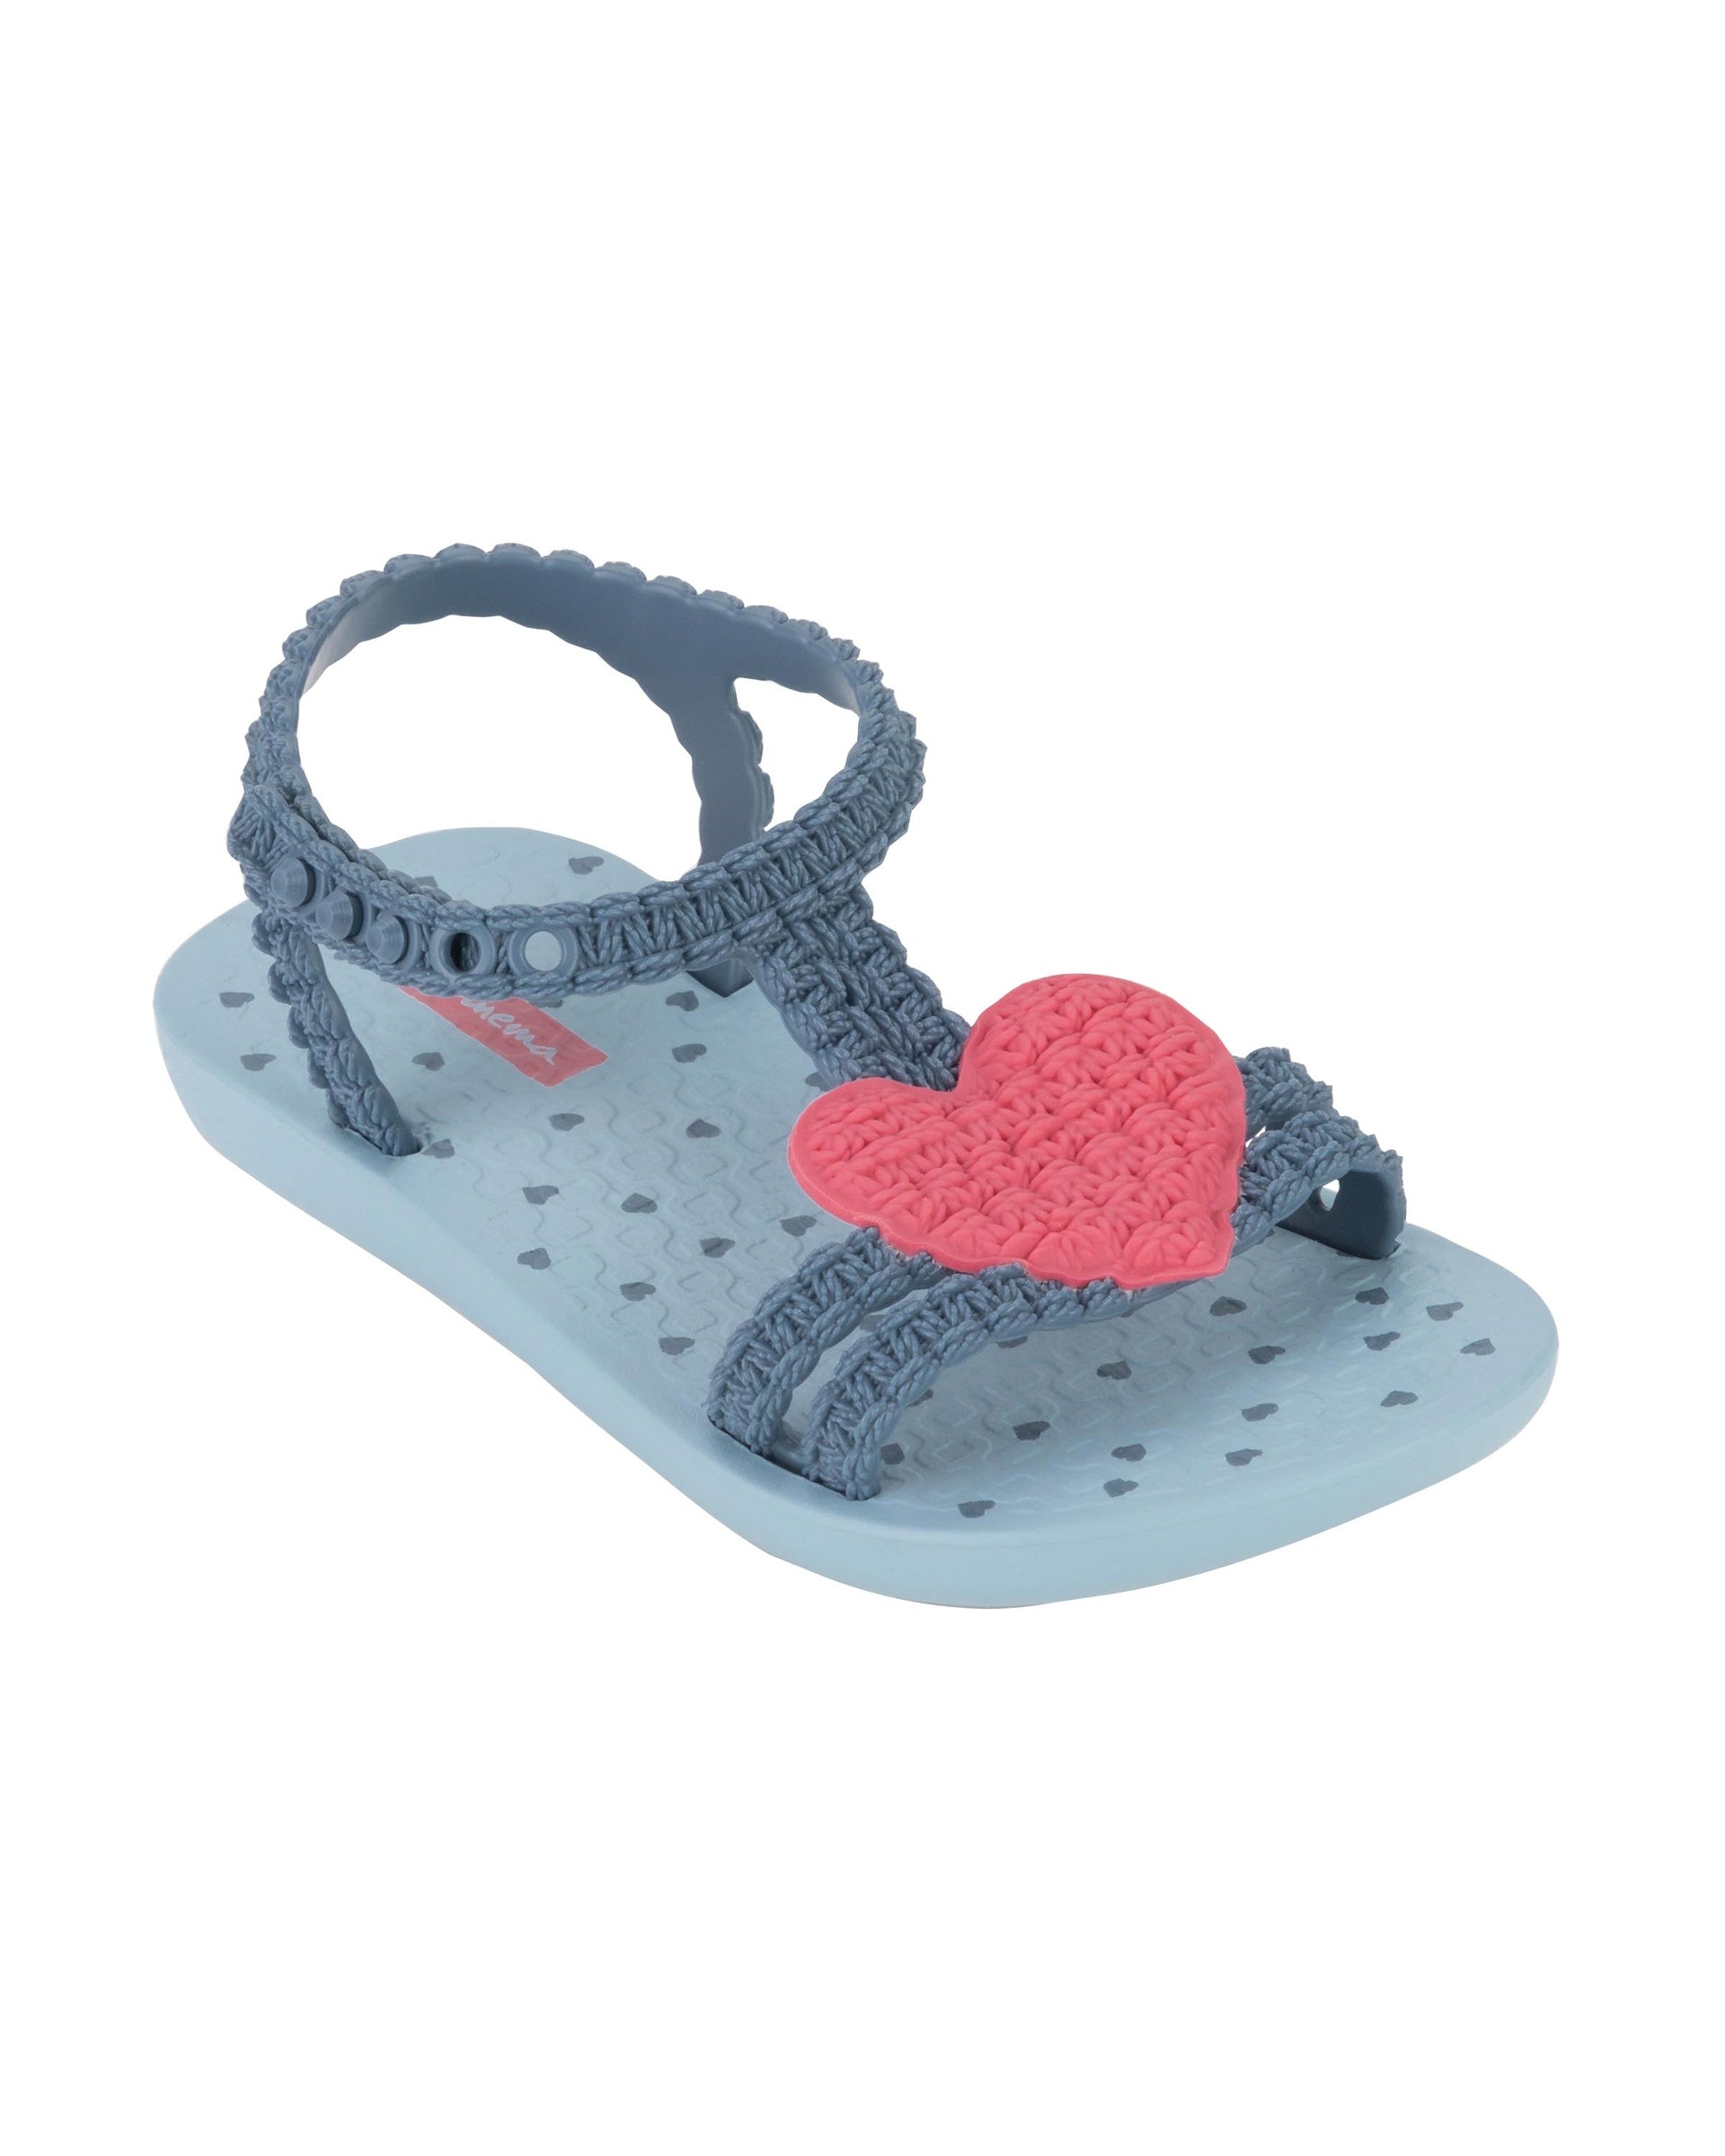 Angled view of a blue Ipanema My First Ipanema baby sandal with pink heart on top and crochet texture .